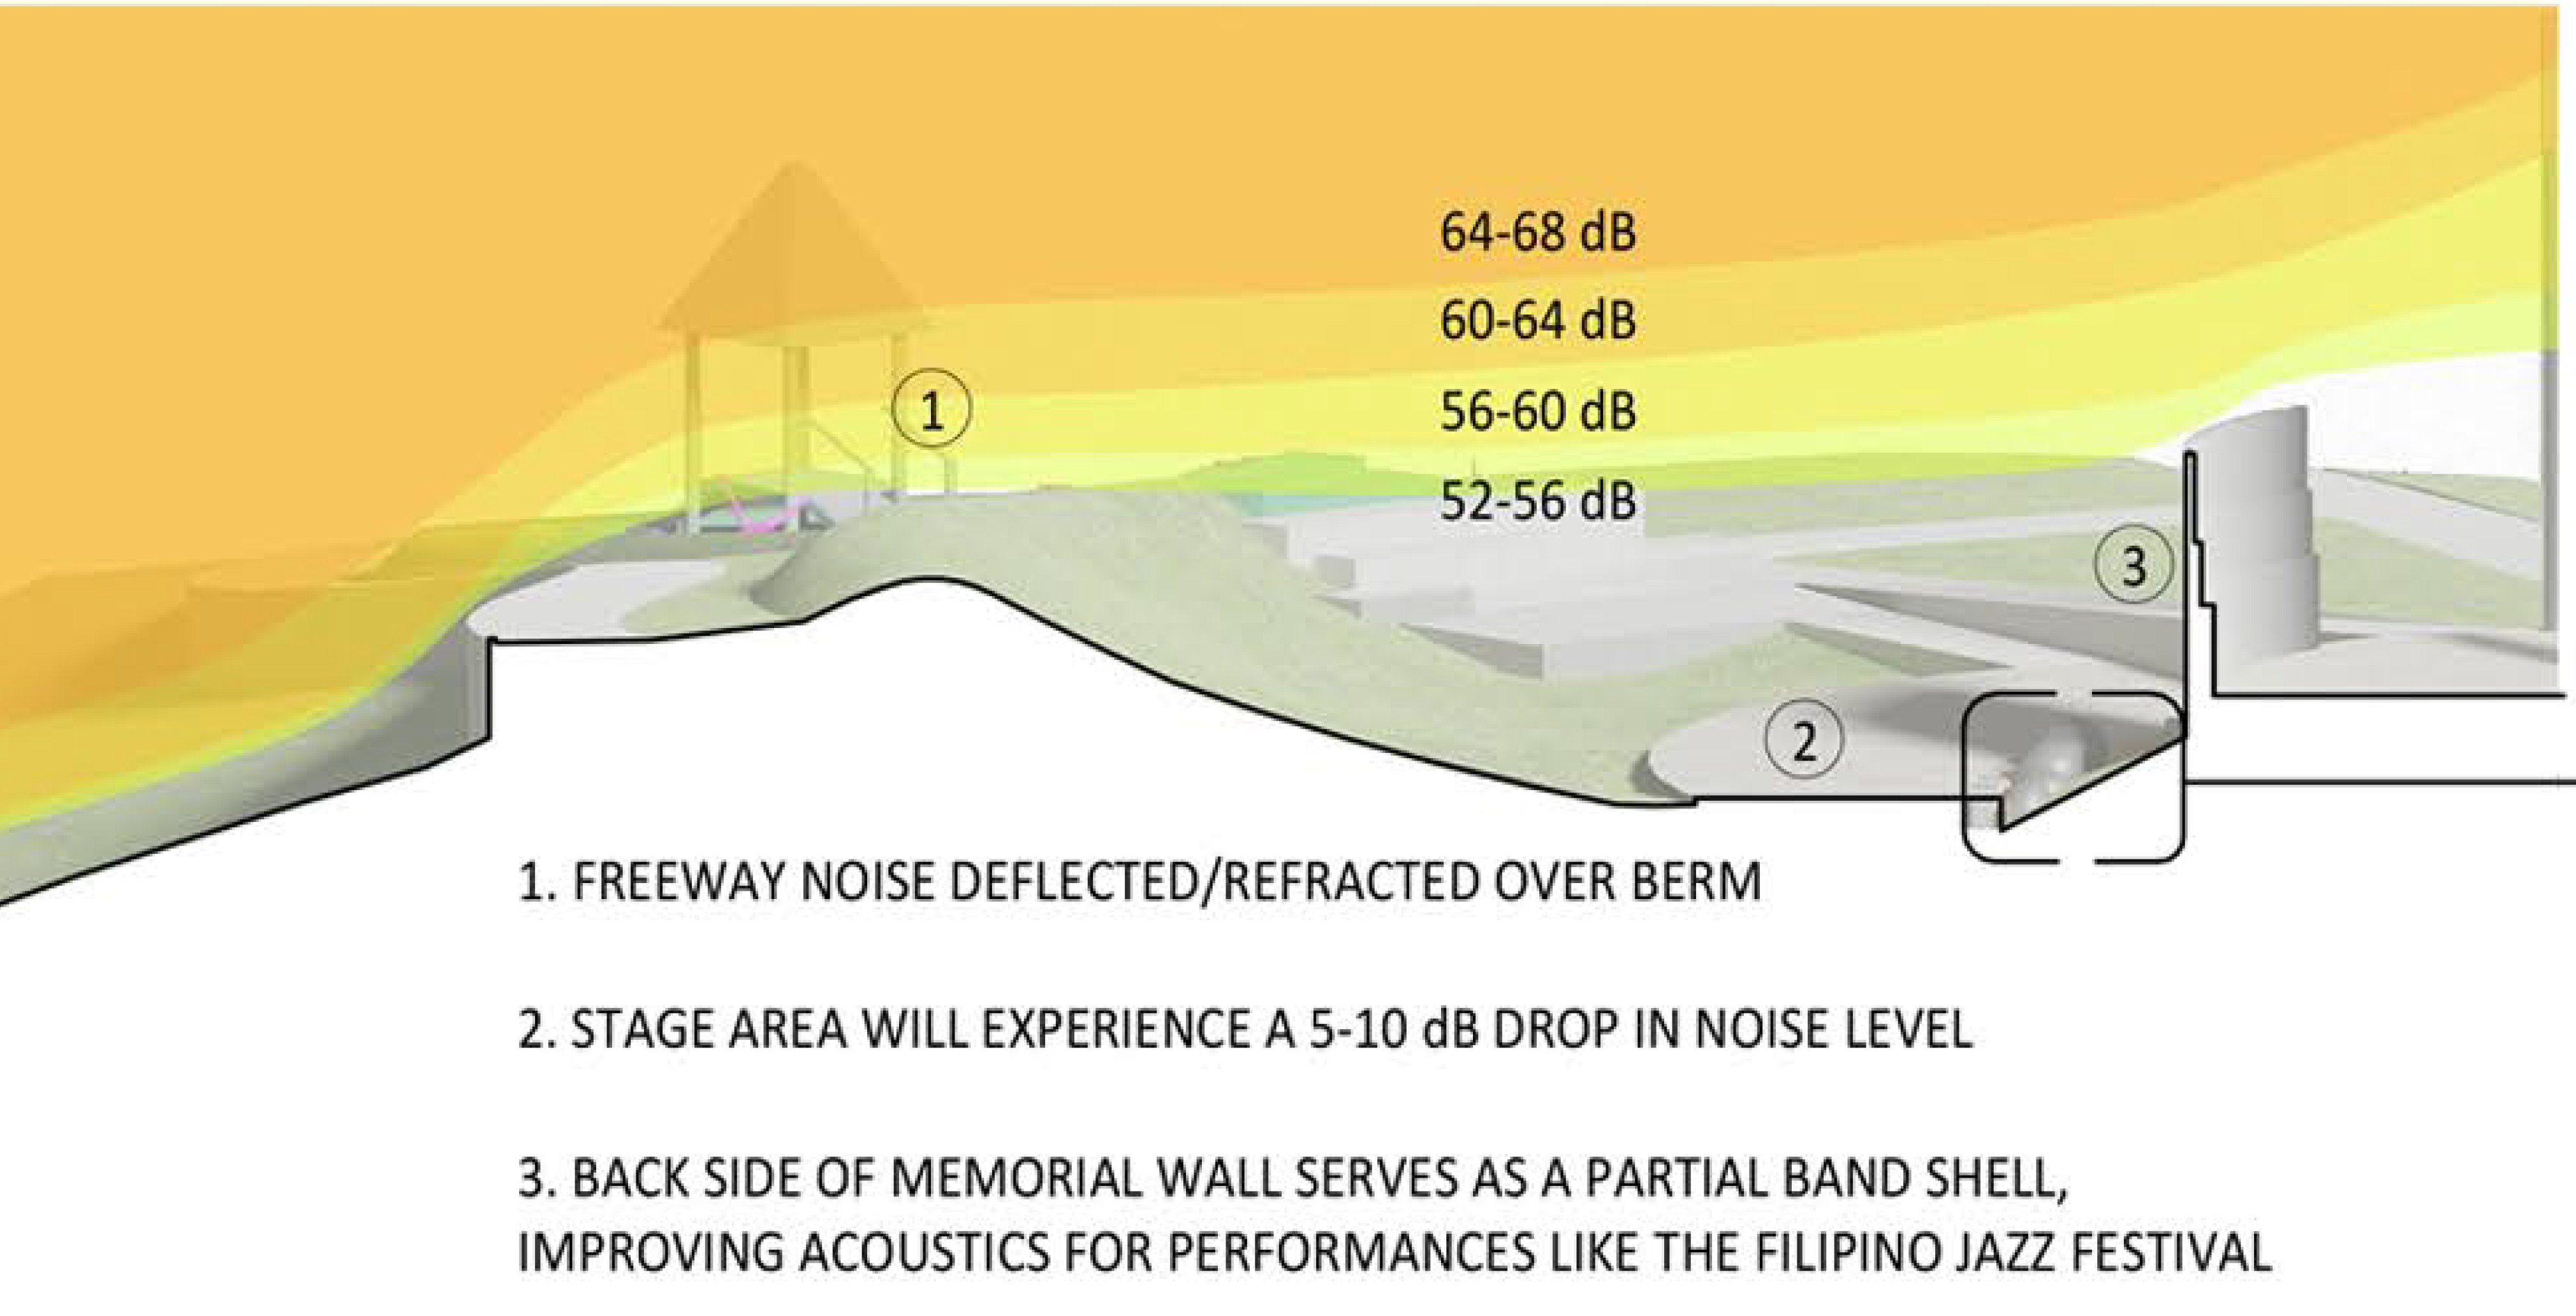 estimation of freeway noise traveling over the berm based on
measurements taken on site